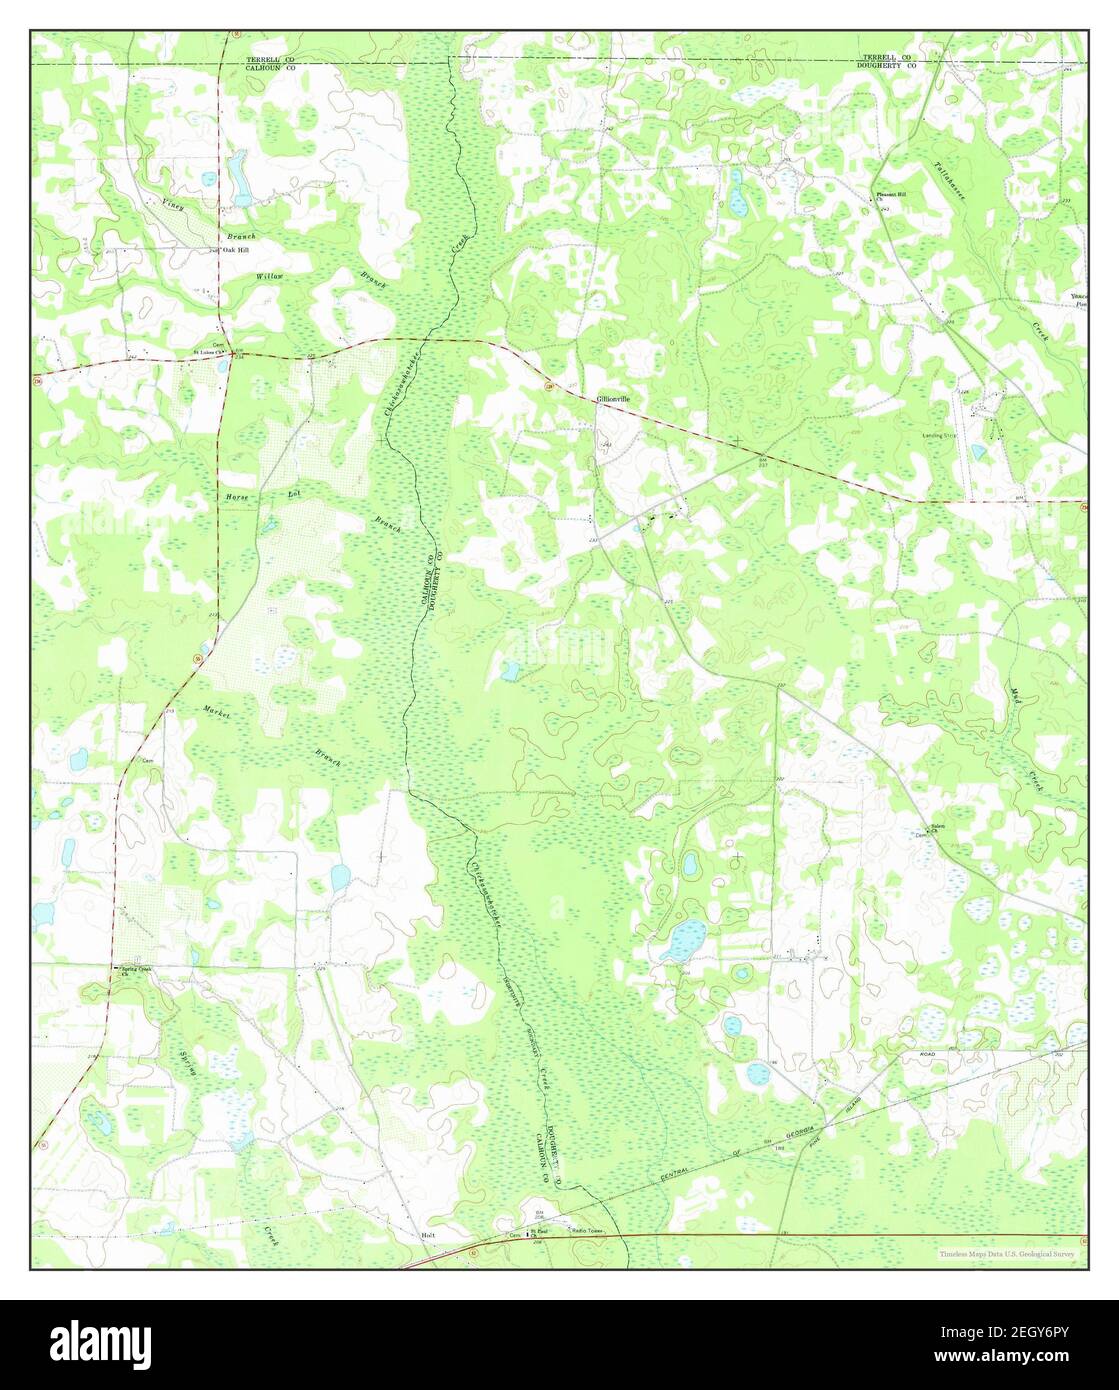 Holt, Georgia, map 1973, 1:24000, United States of America by Timeless Maps, data U.S. Geological Survey Stock Photo